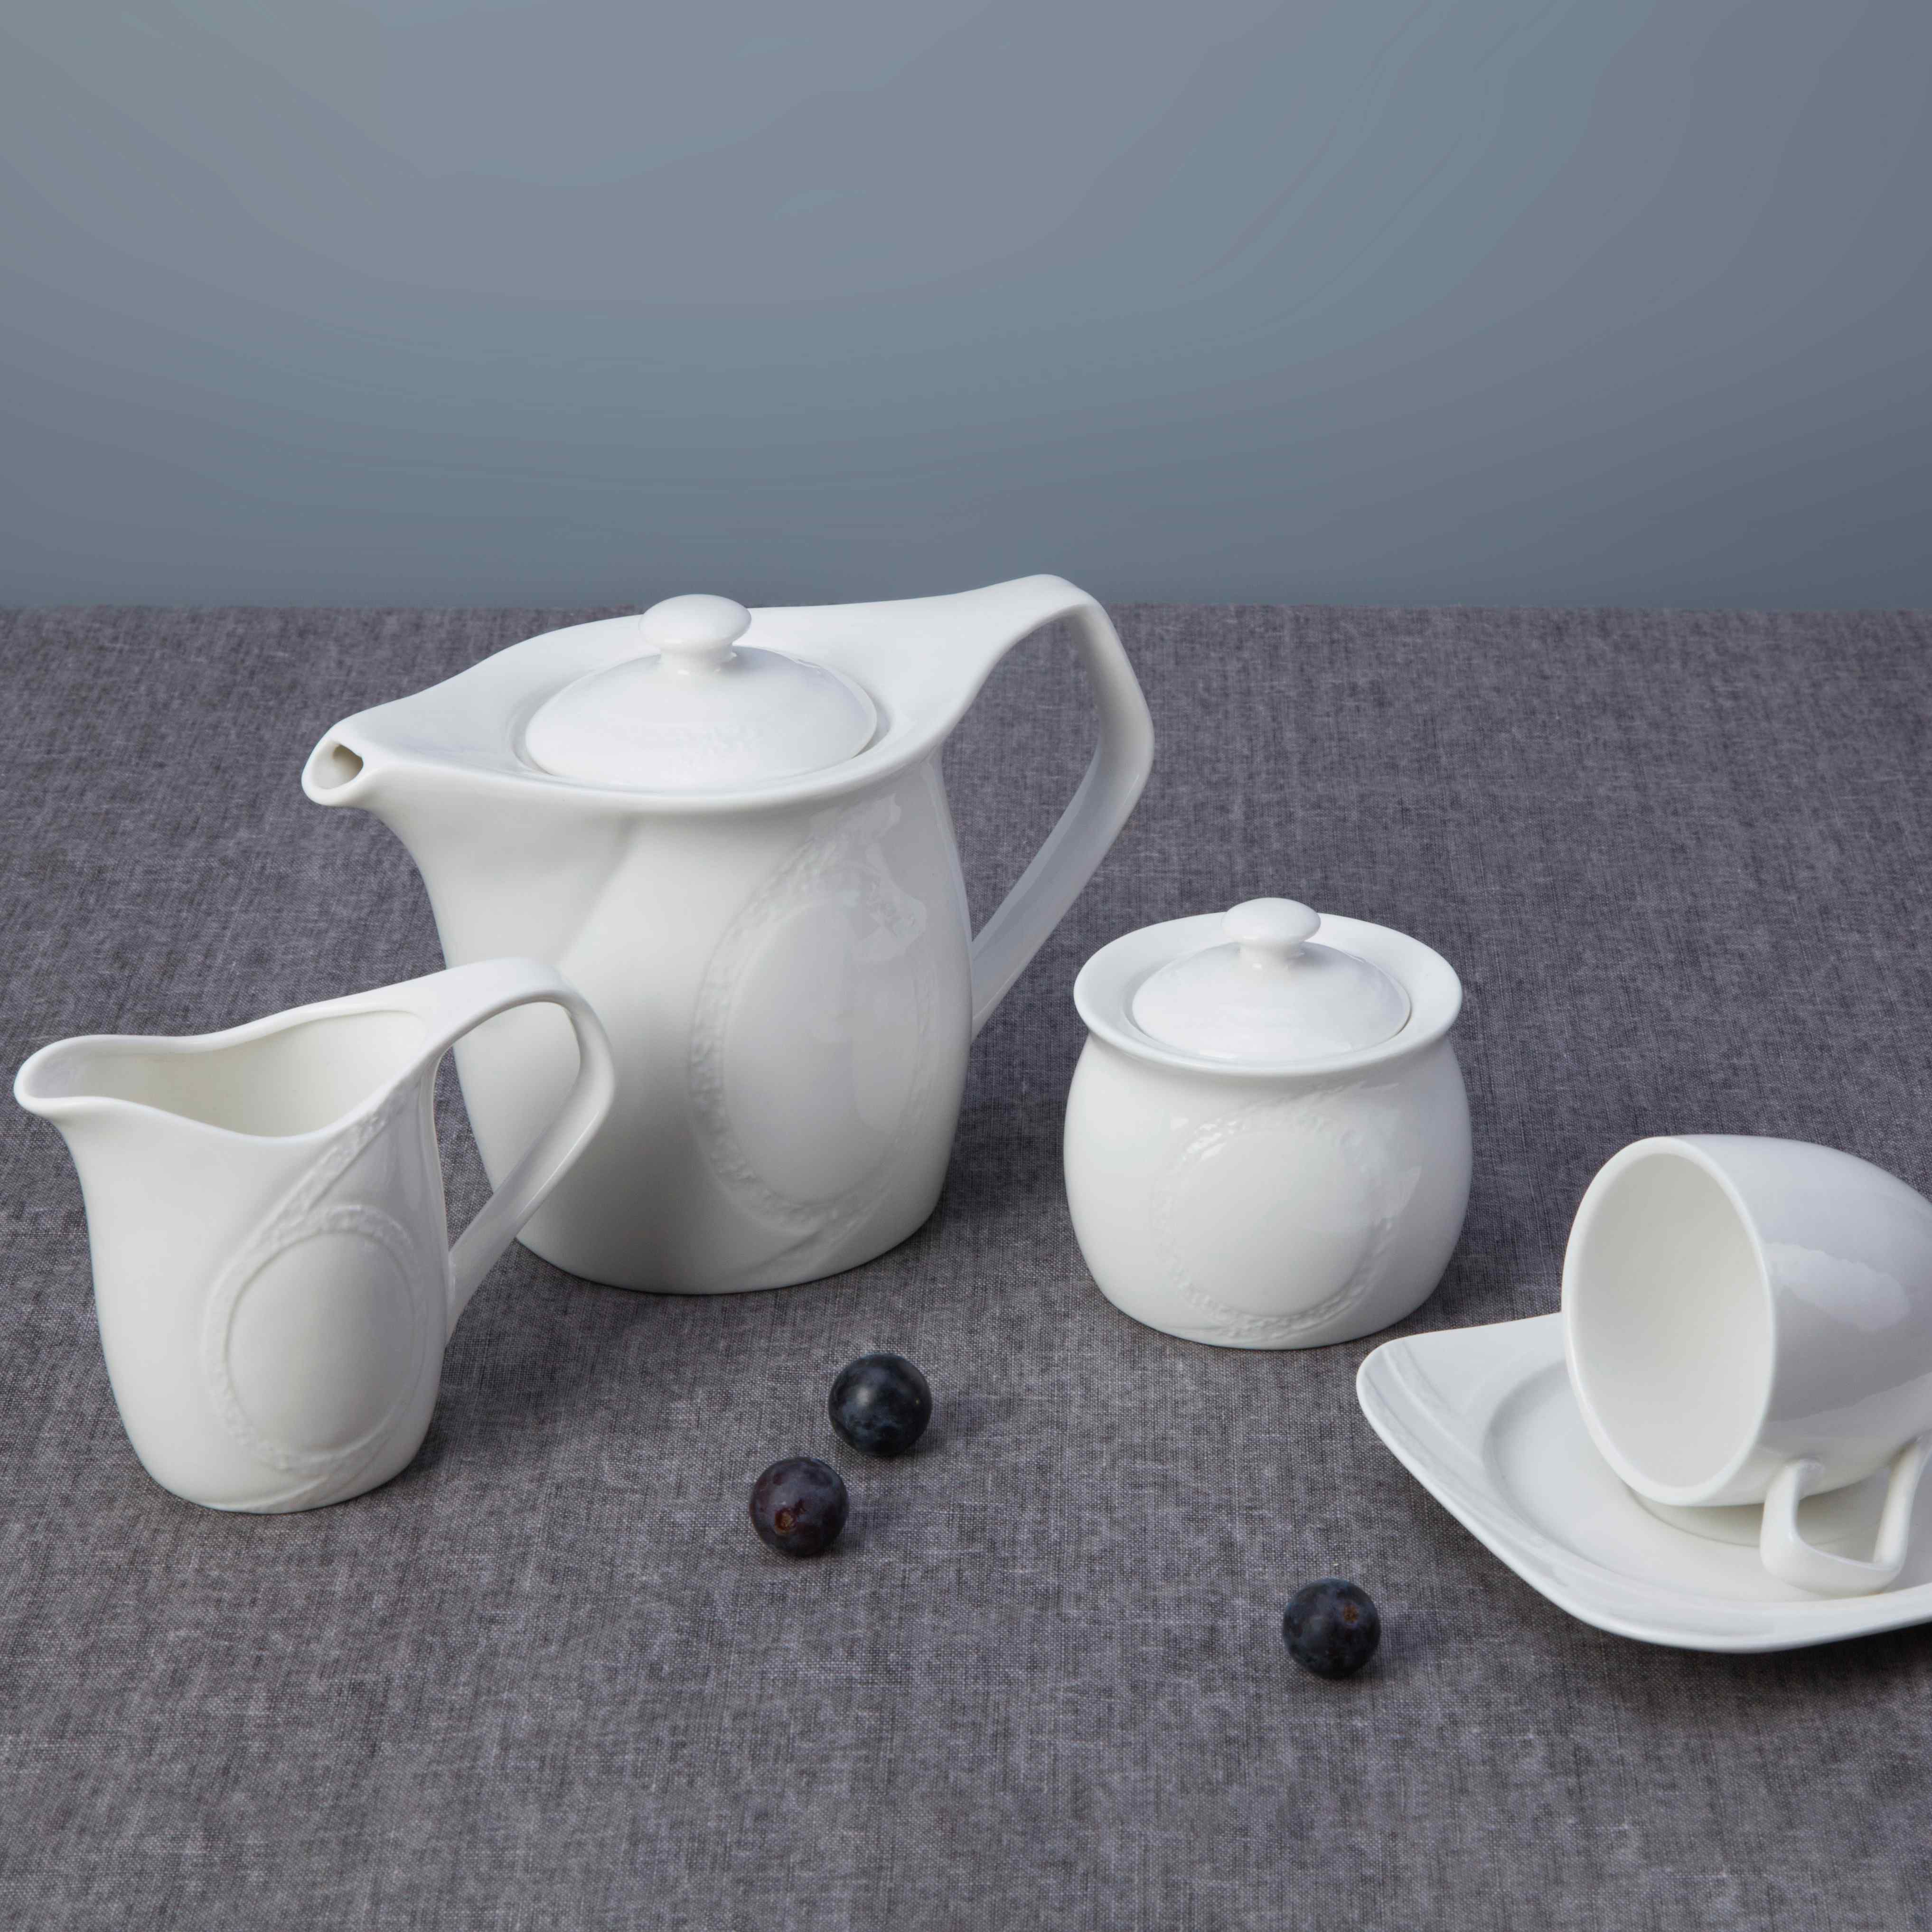 Two Eight-Find Restaurant Dining Ware White Porcelain Tableware From Two Eight Ceramics-1